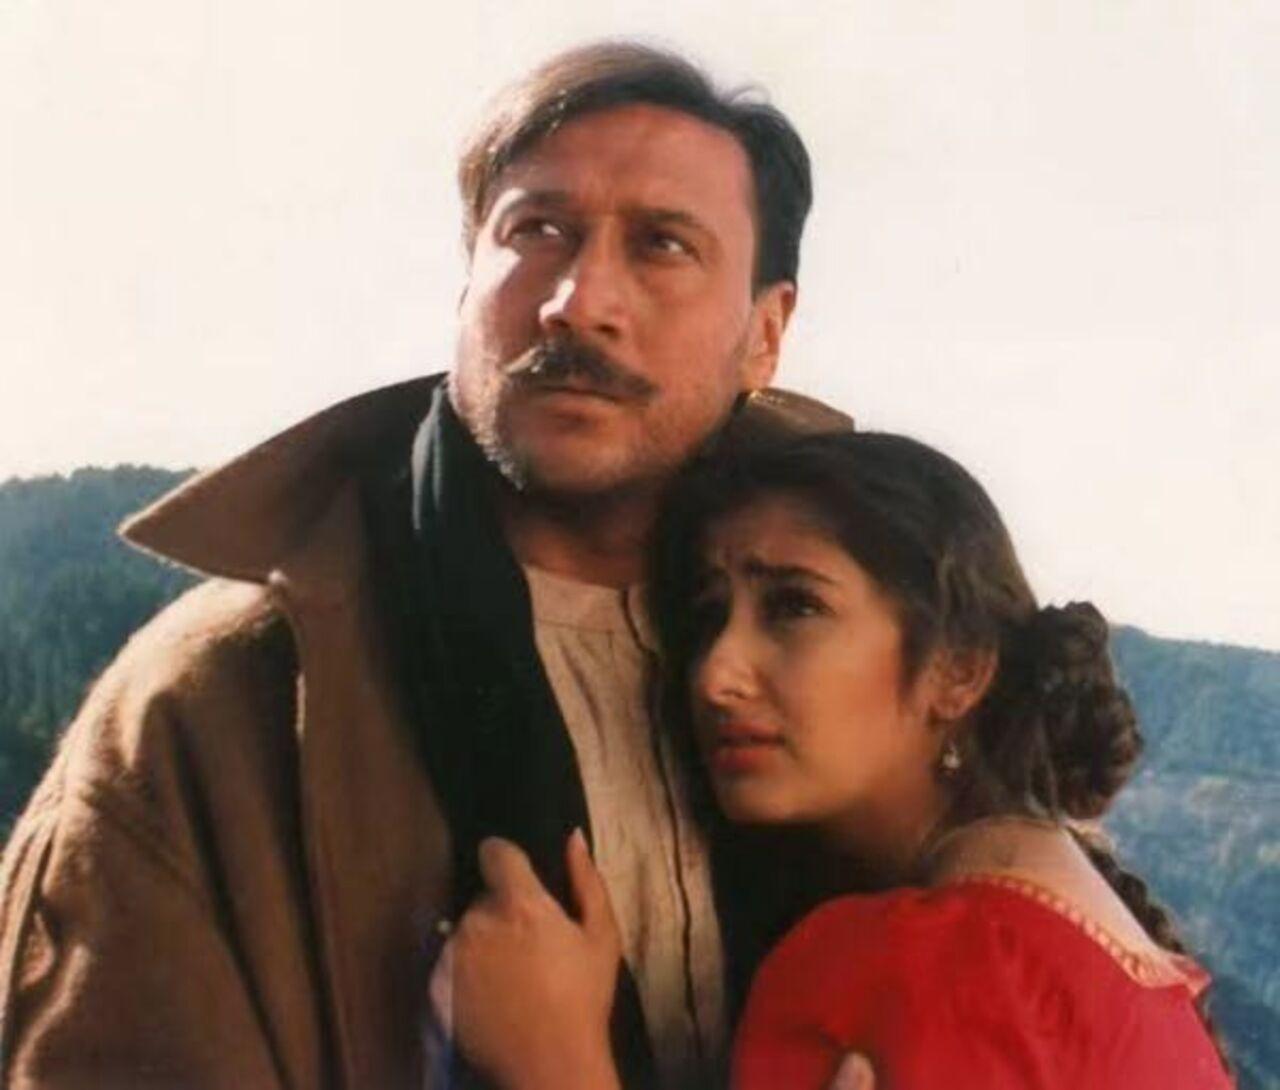 Apart from Hindi films, Jackie Shroff has also worked in other Indian languages like Marathi, Bengali, Kannada, Malayalam, and Telugu. He has received several awards for his contributions to the Indian film industry